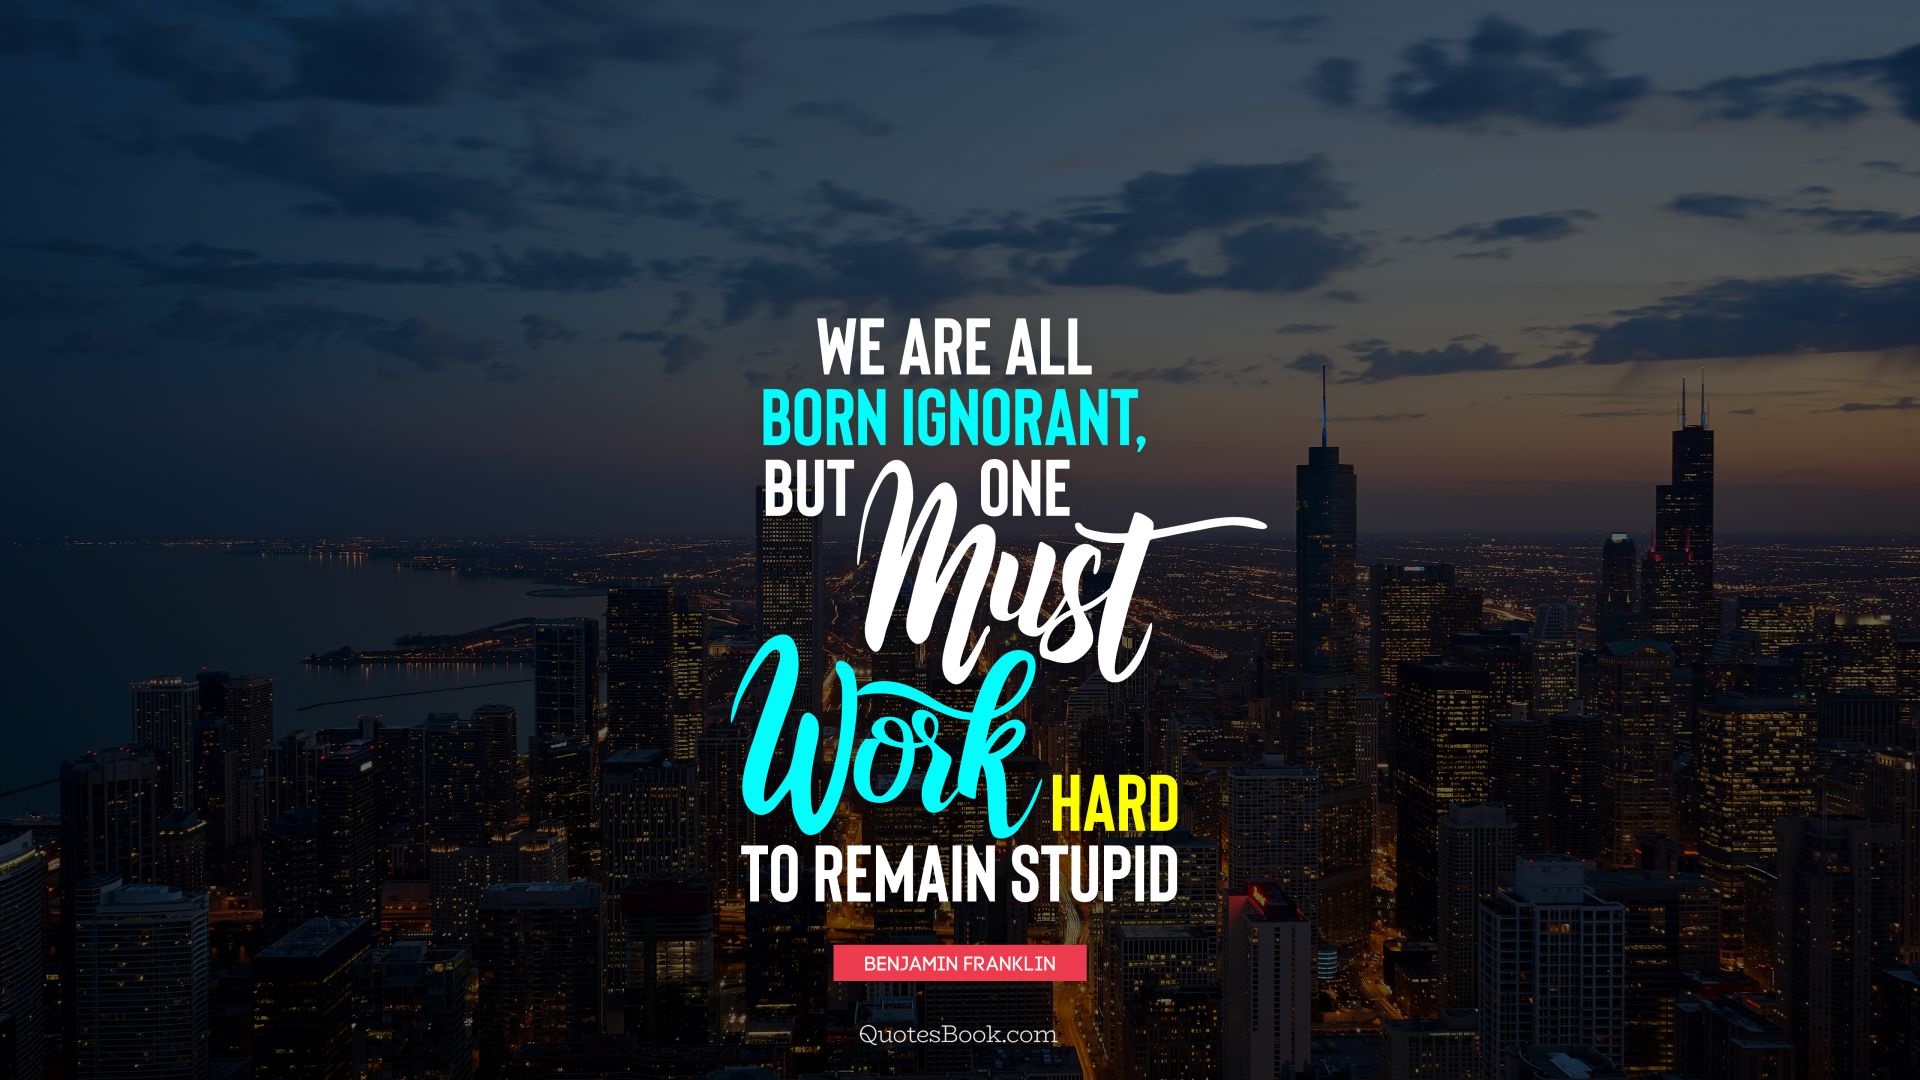 We are all born ignorant, but one must work hard to remain stupid. - Quote by Benjamin Franklin